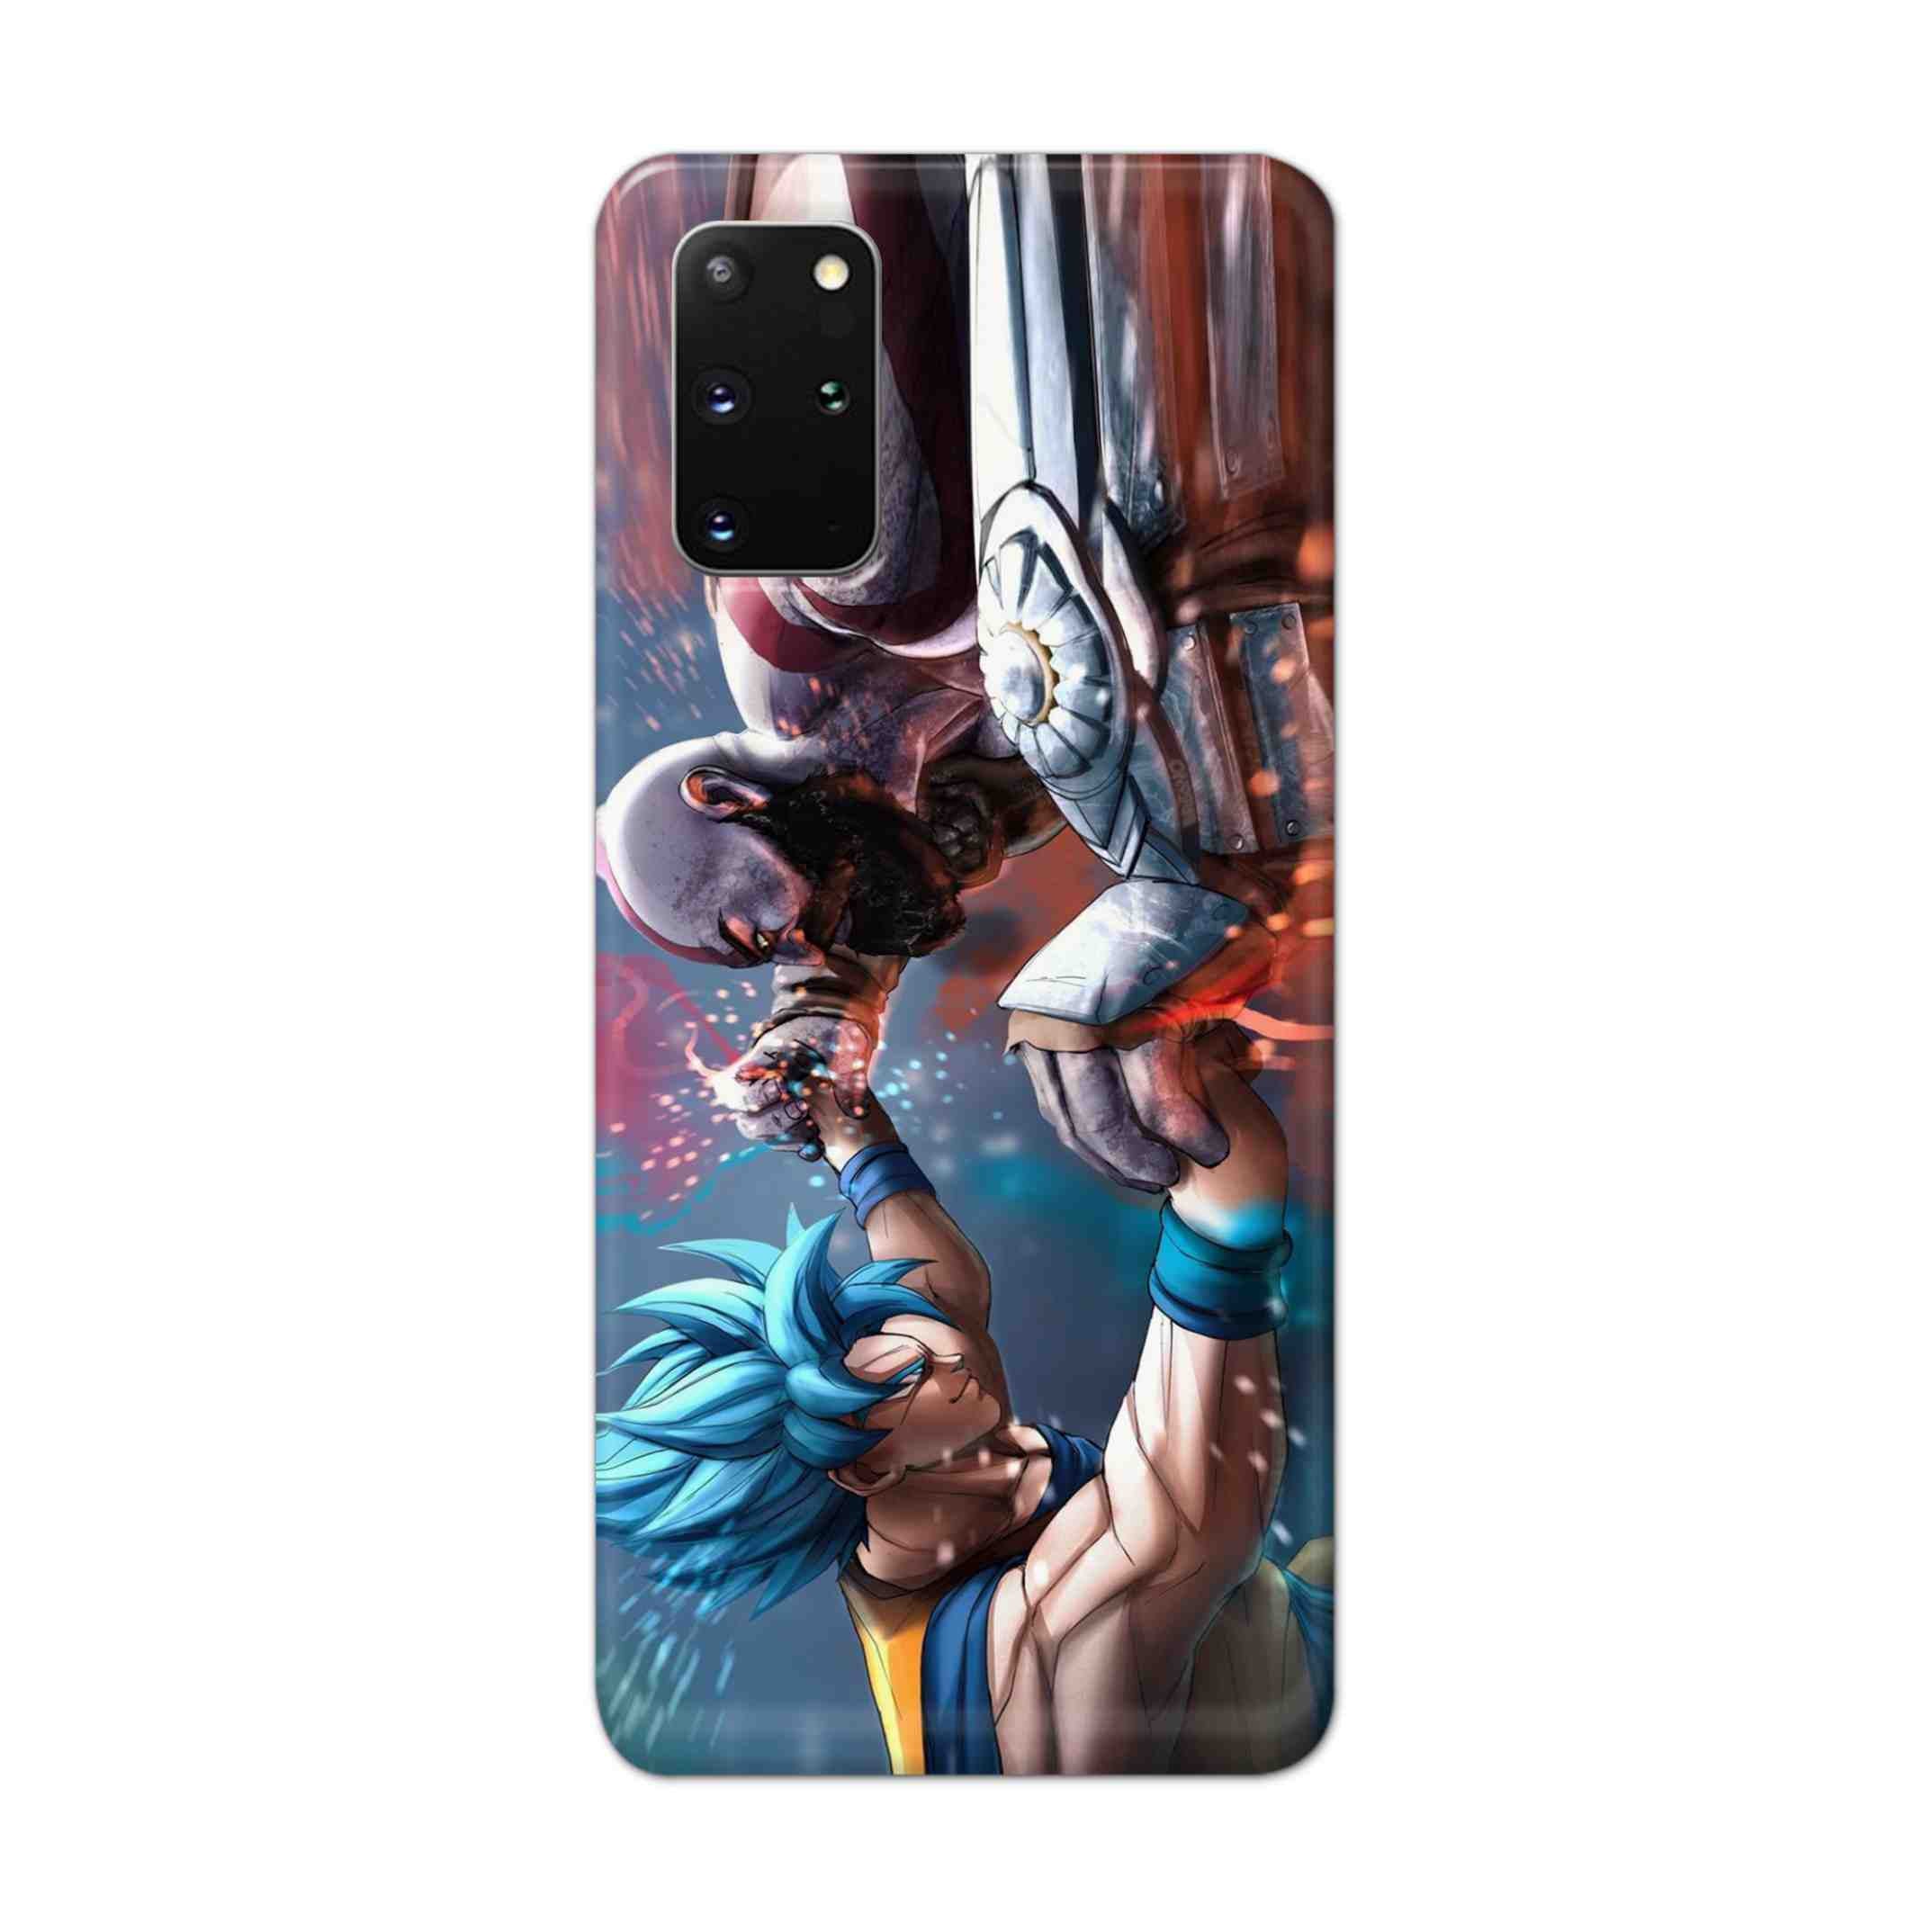 Buy Goku Vs Kratos Hard Back Mobile Phone Case Cover For Samsung Galaxy S20 Plus Online